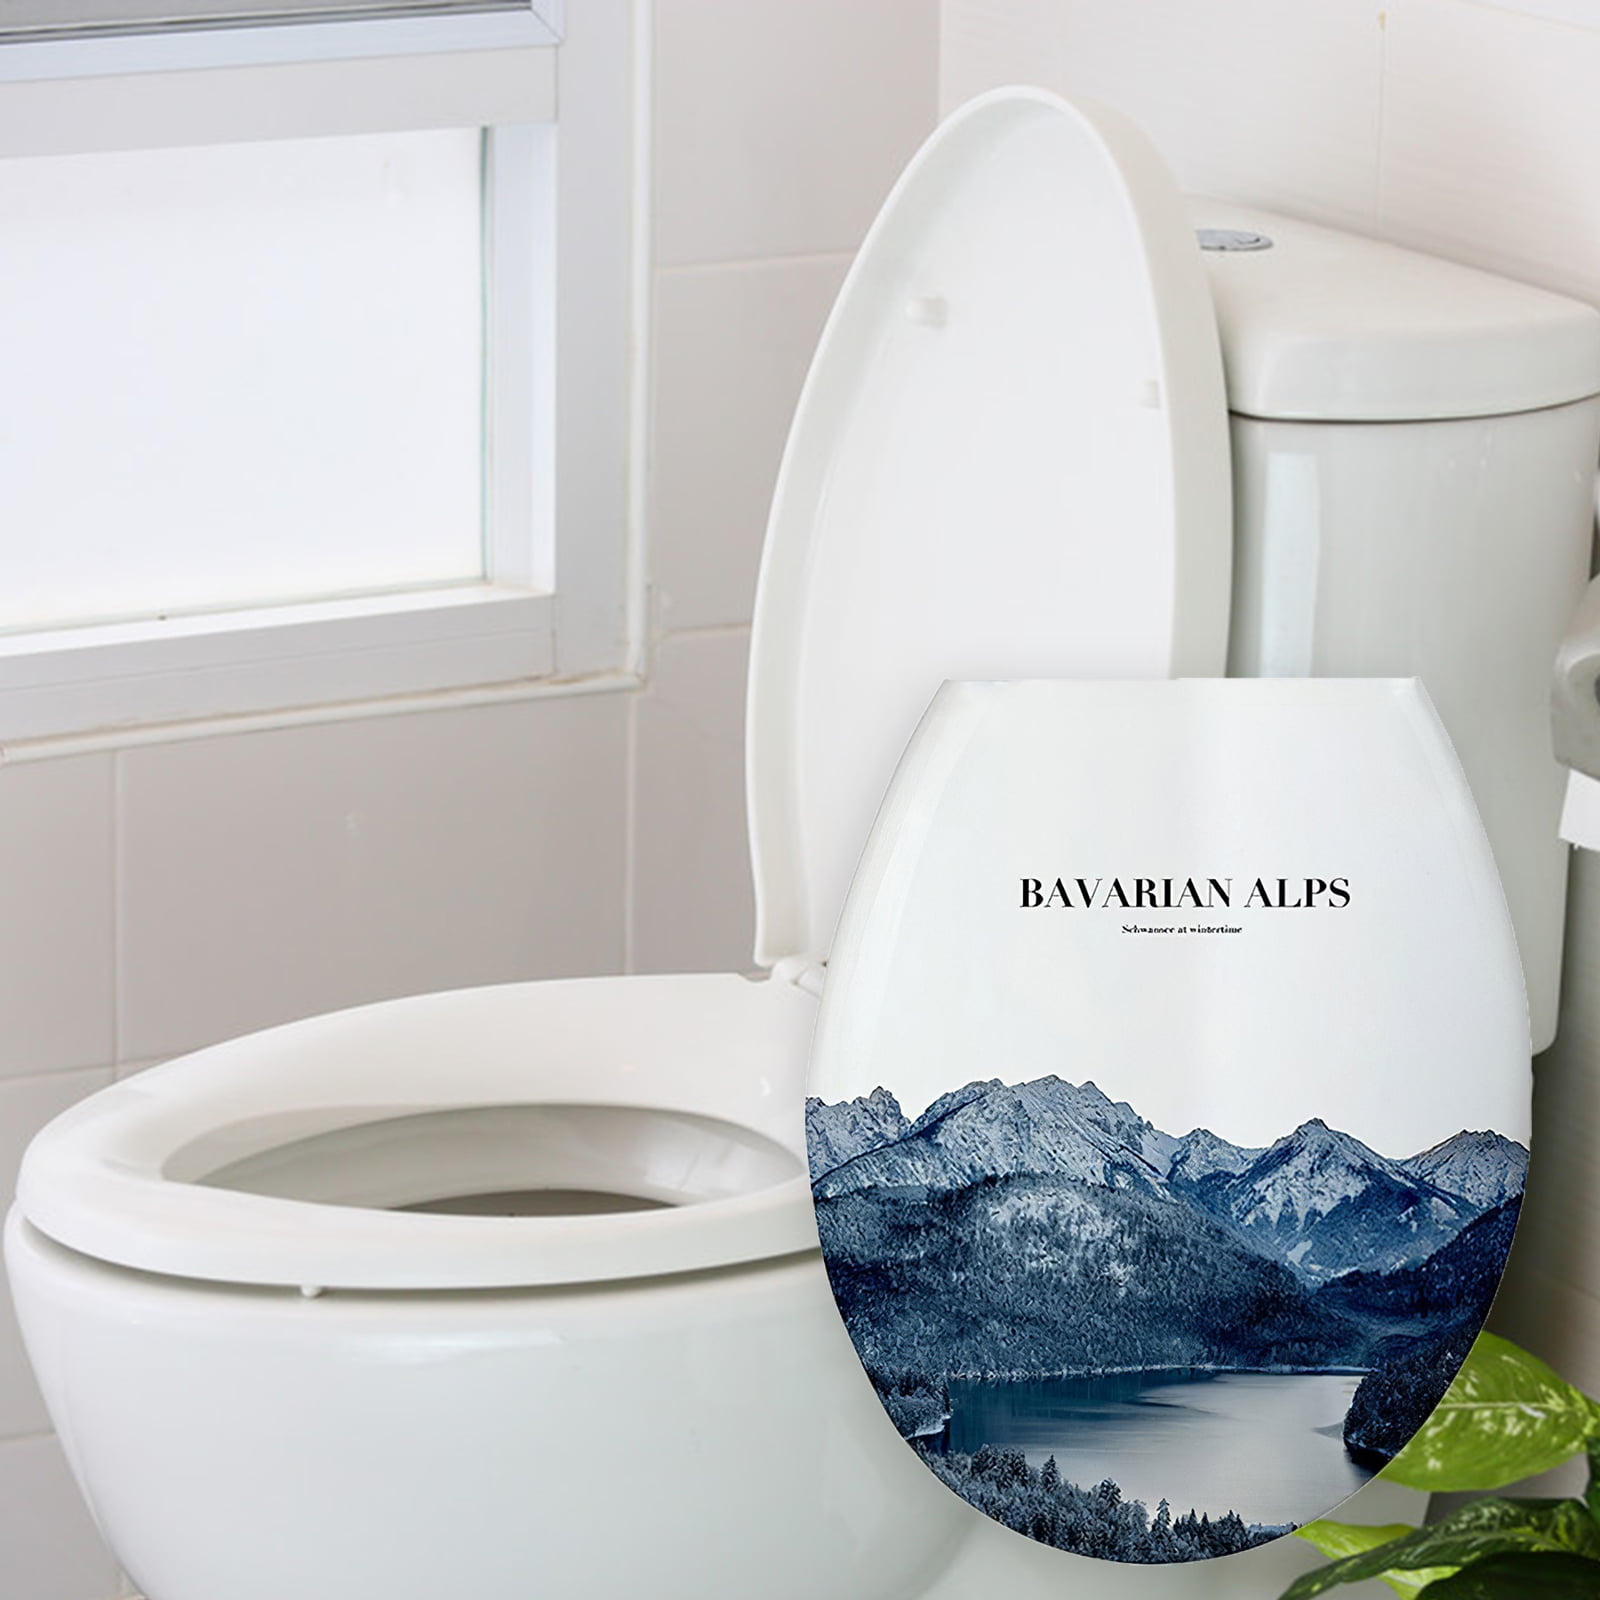 High-Quality Surface Stable Hinges Easy to Mount Wide Choice of New Toilet Seats Soft Close Toilet Seat Alps 